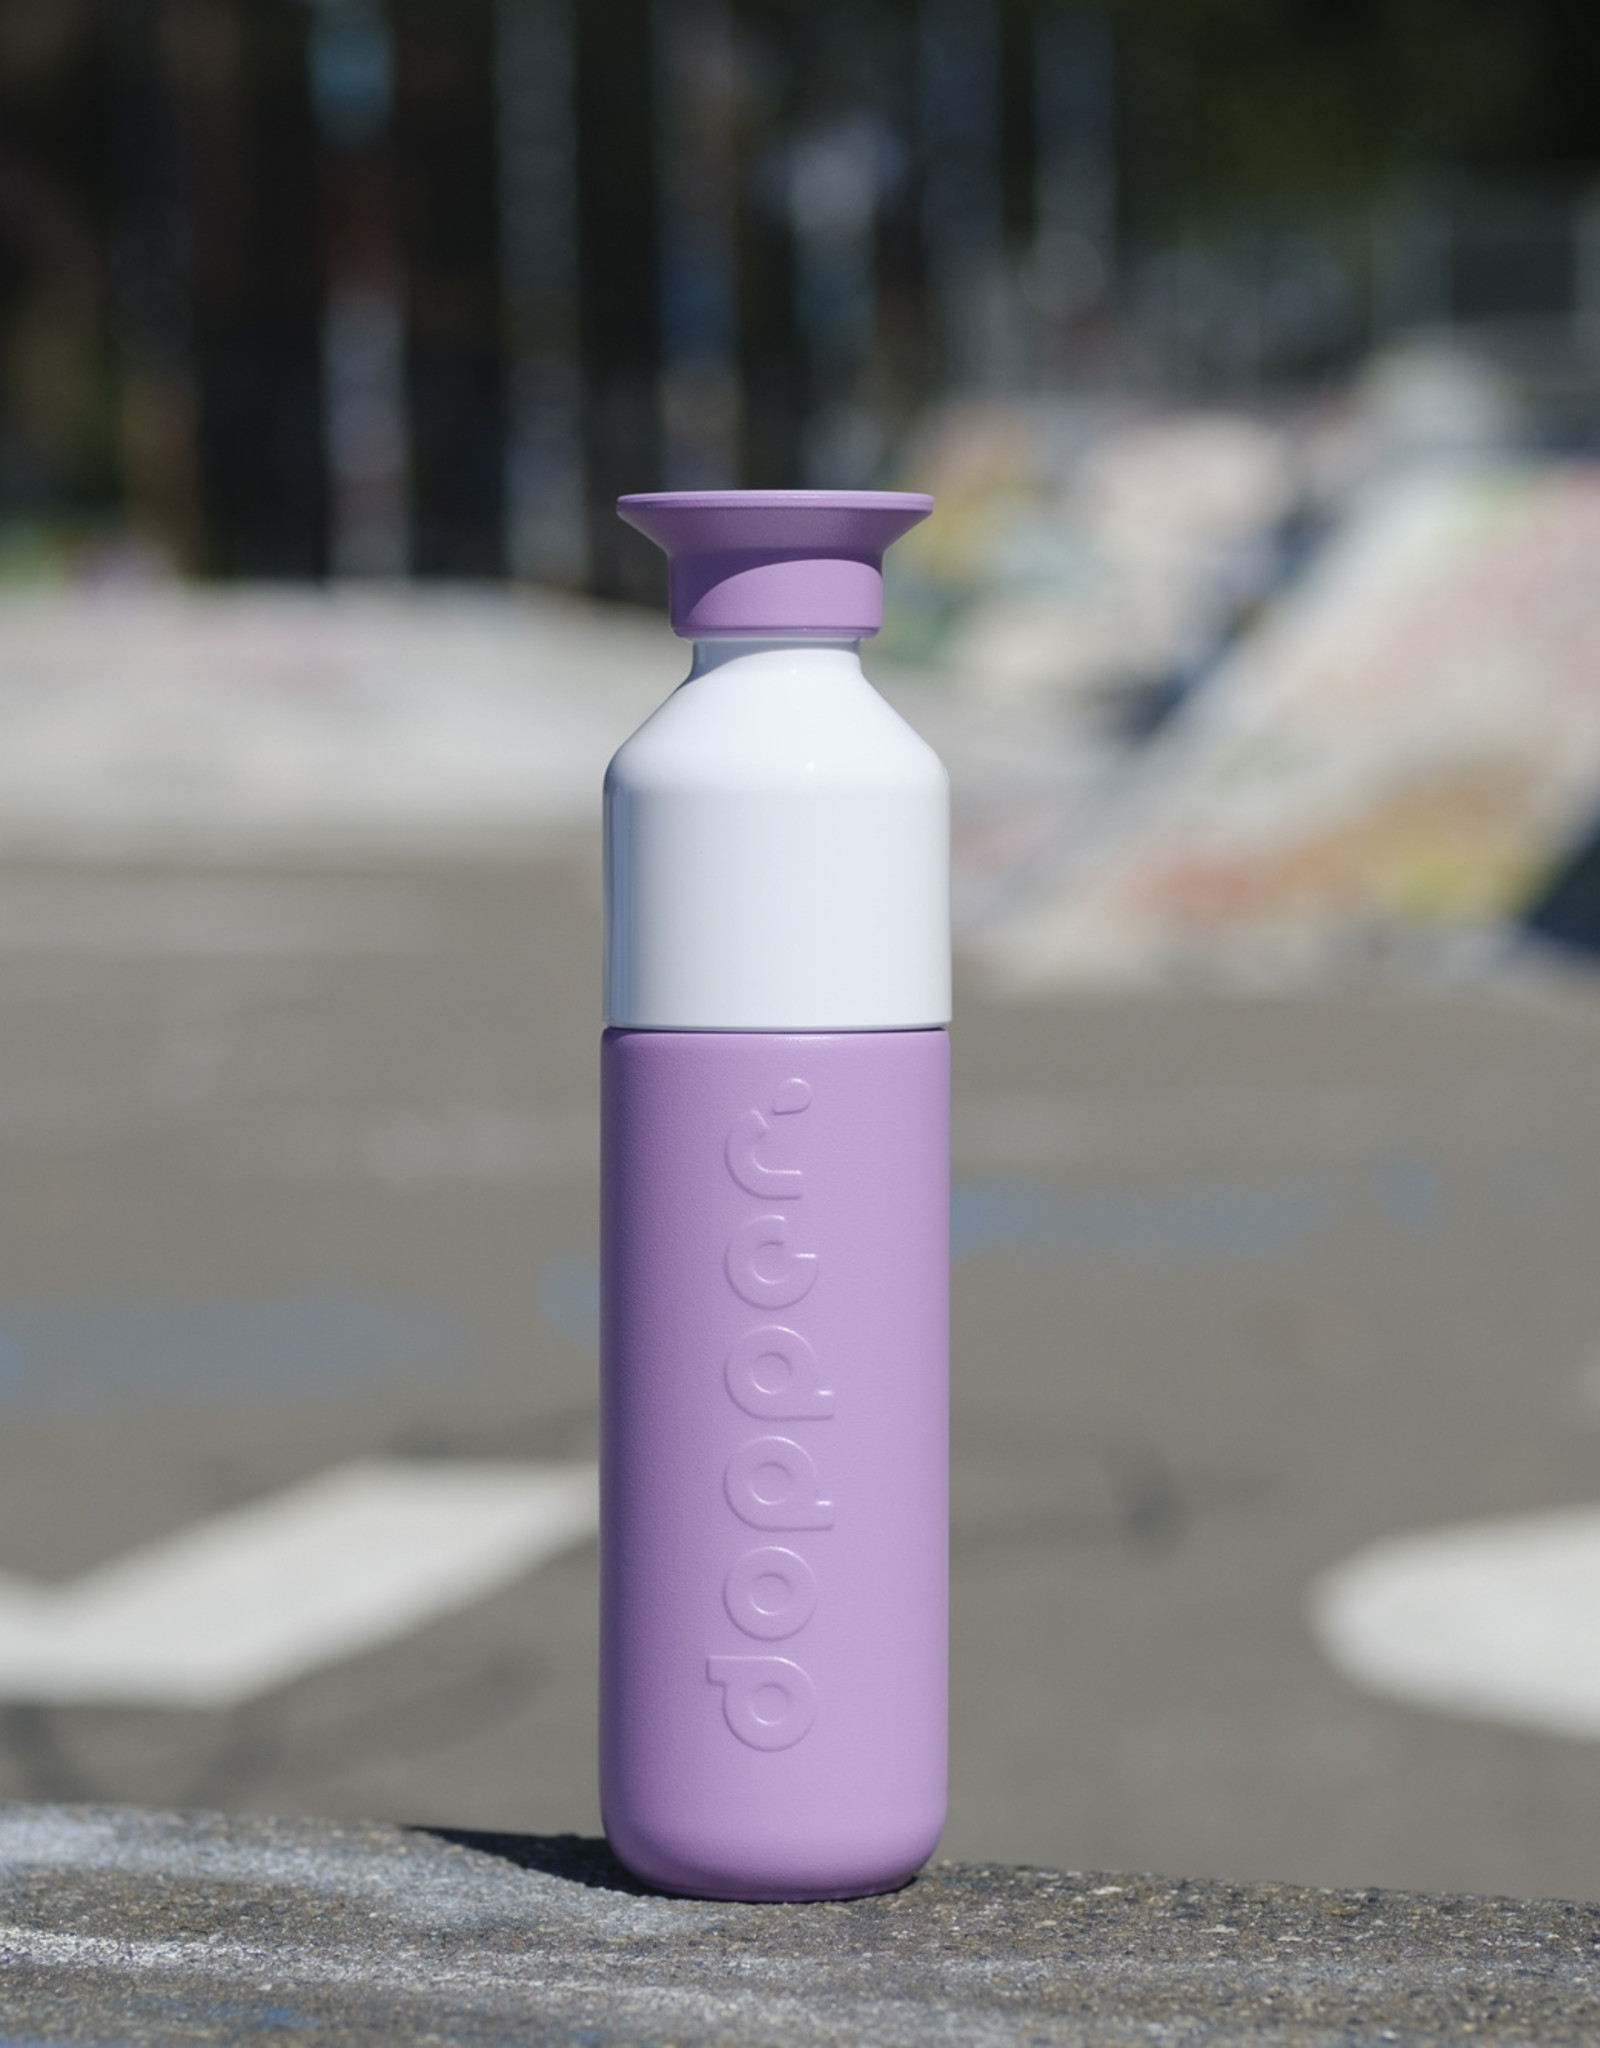 Dopper Dopper HOT&COOL insulated 350ml-throwback lilac